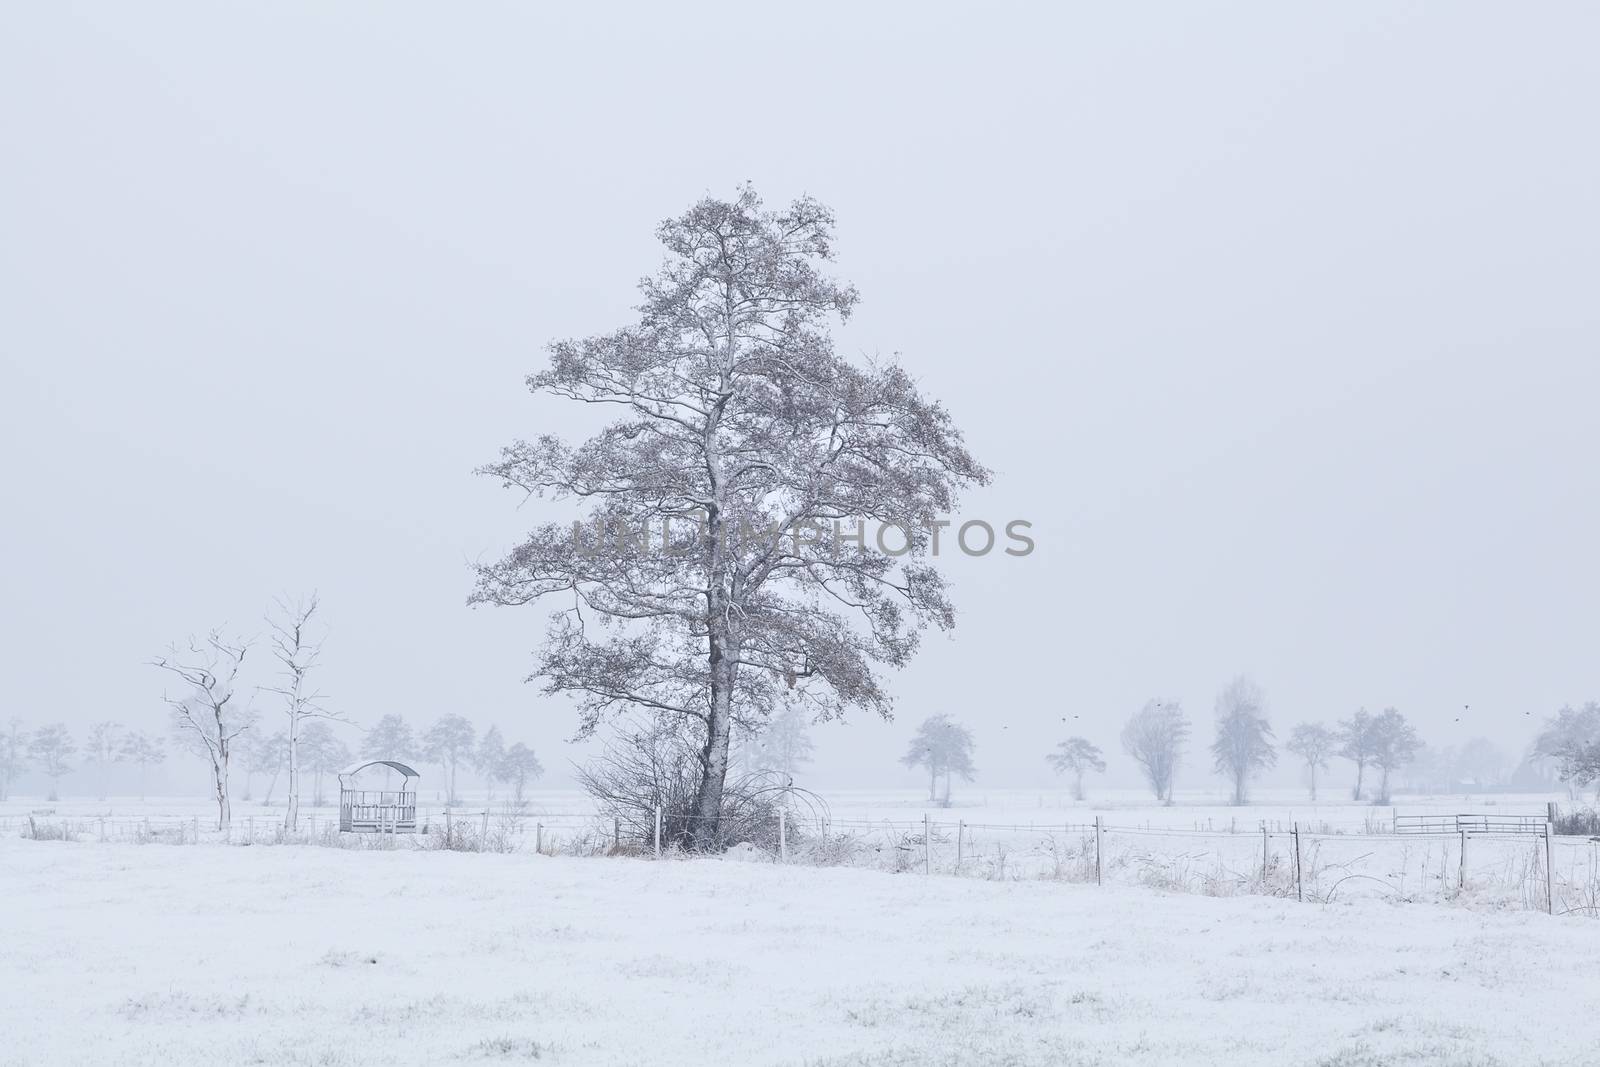 tree in snow on Dutch farmland during winter by catolla